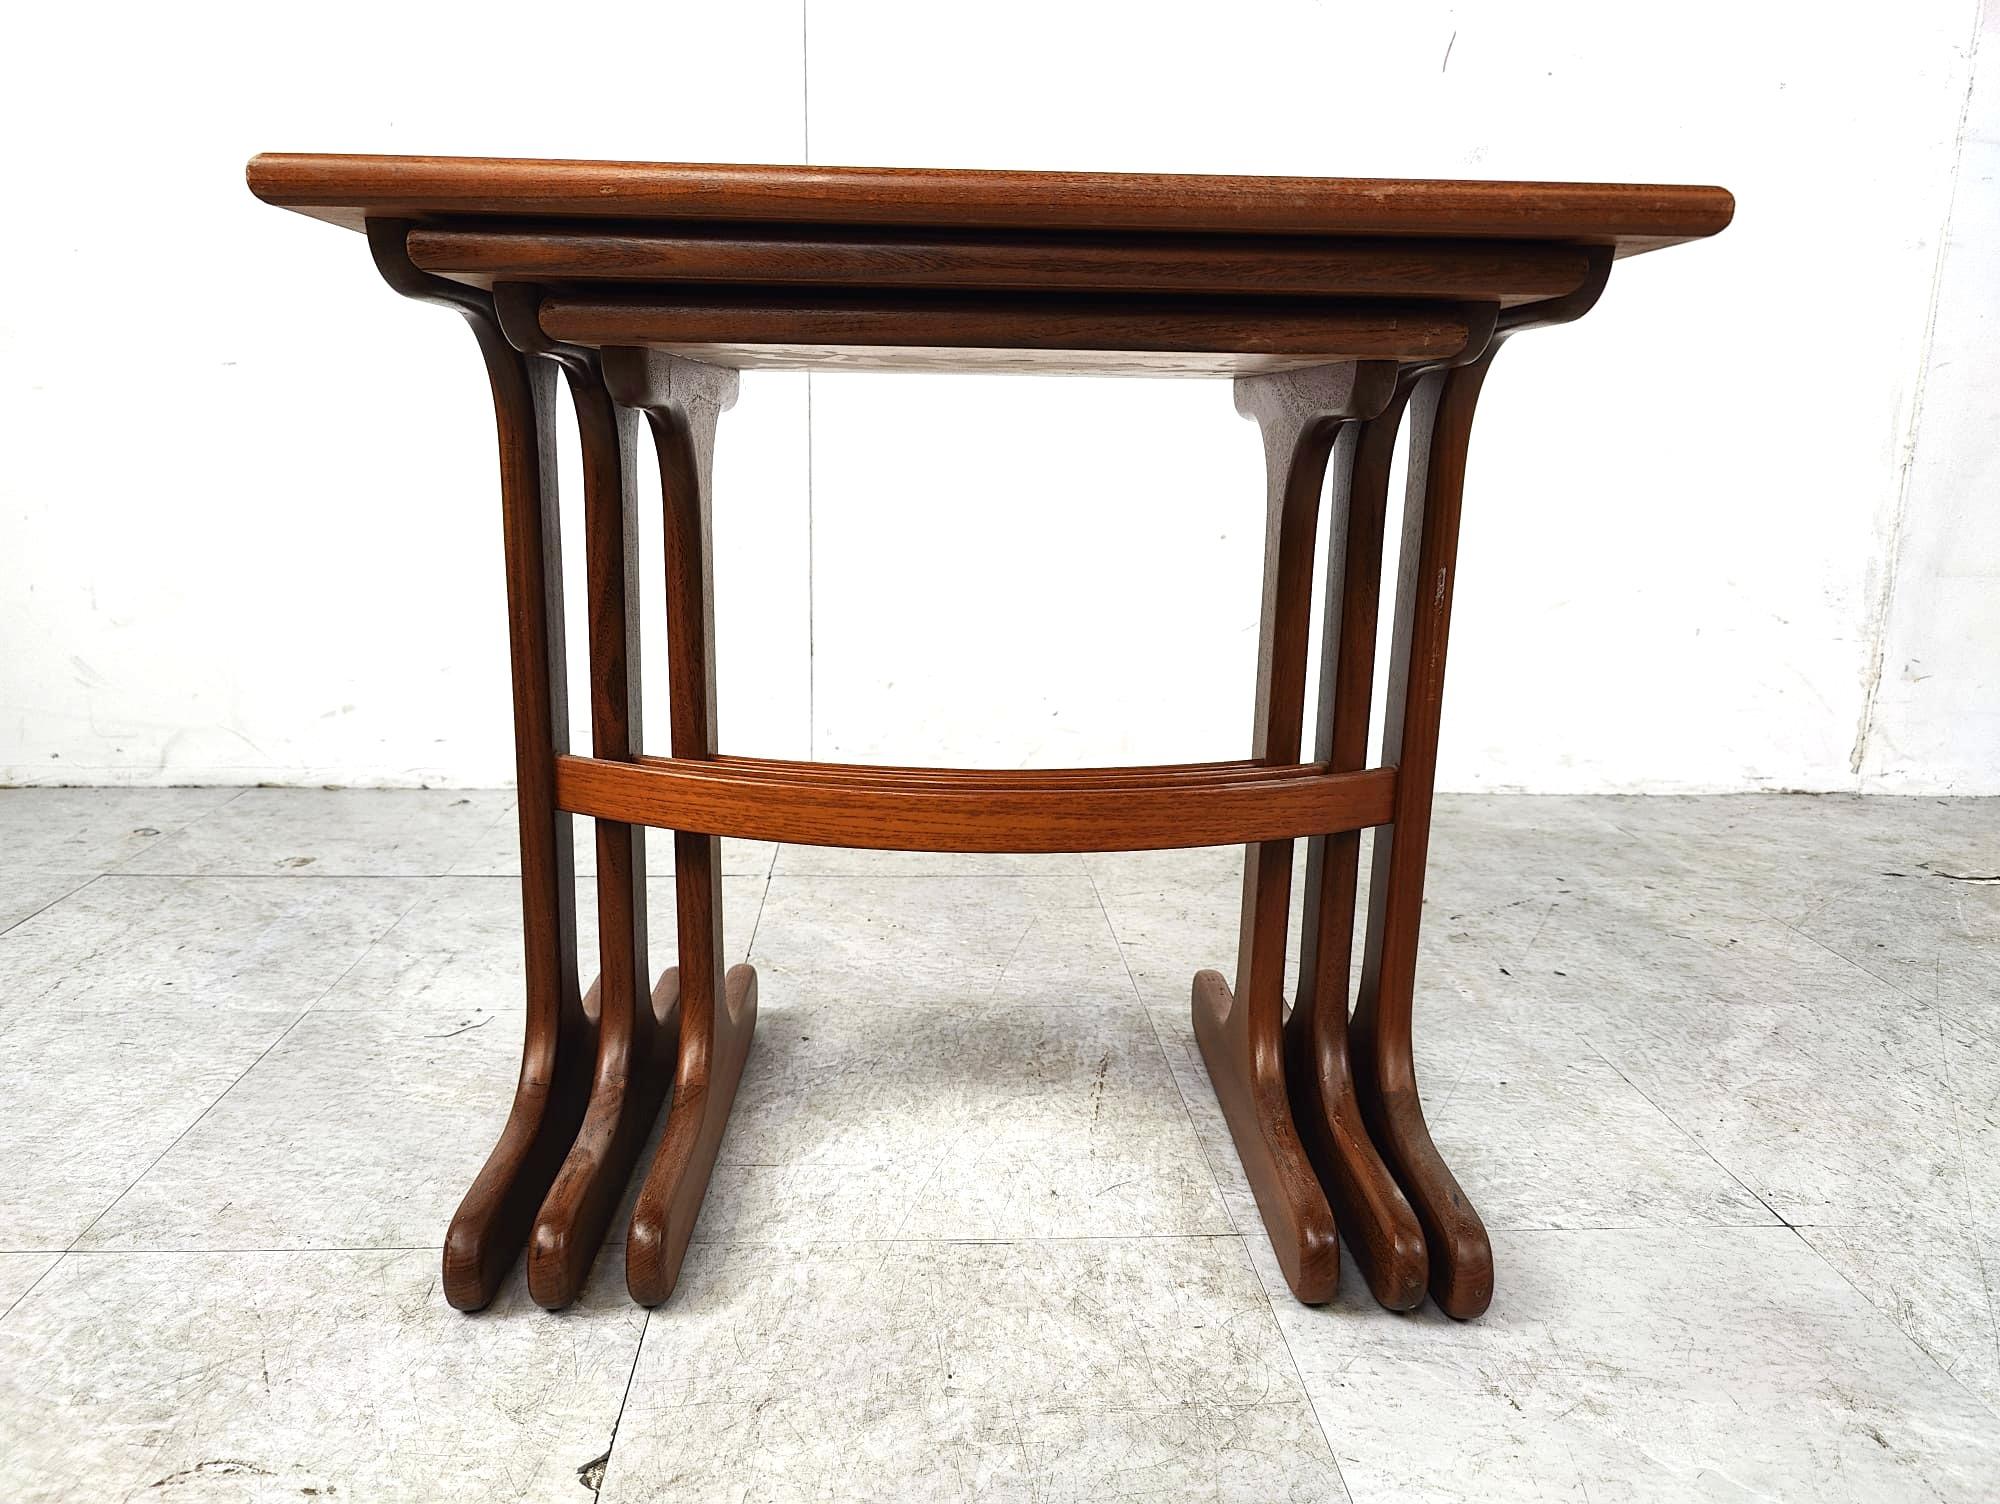 G Plan nest of 3 tables from the E Gomme furniture manufacturer. Each top is teak veneered and finished with solid teak edging, and each solid teak base has 2 stylishly fashioned pedestals which are connected by a curved stretcher. 

Beautiful